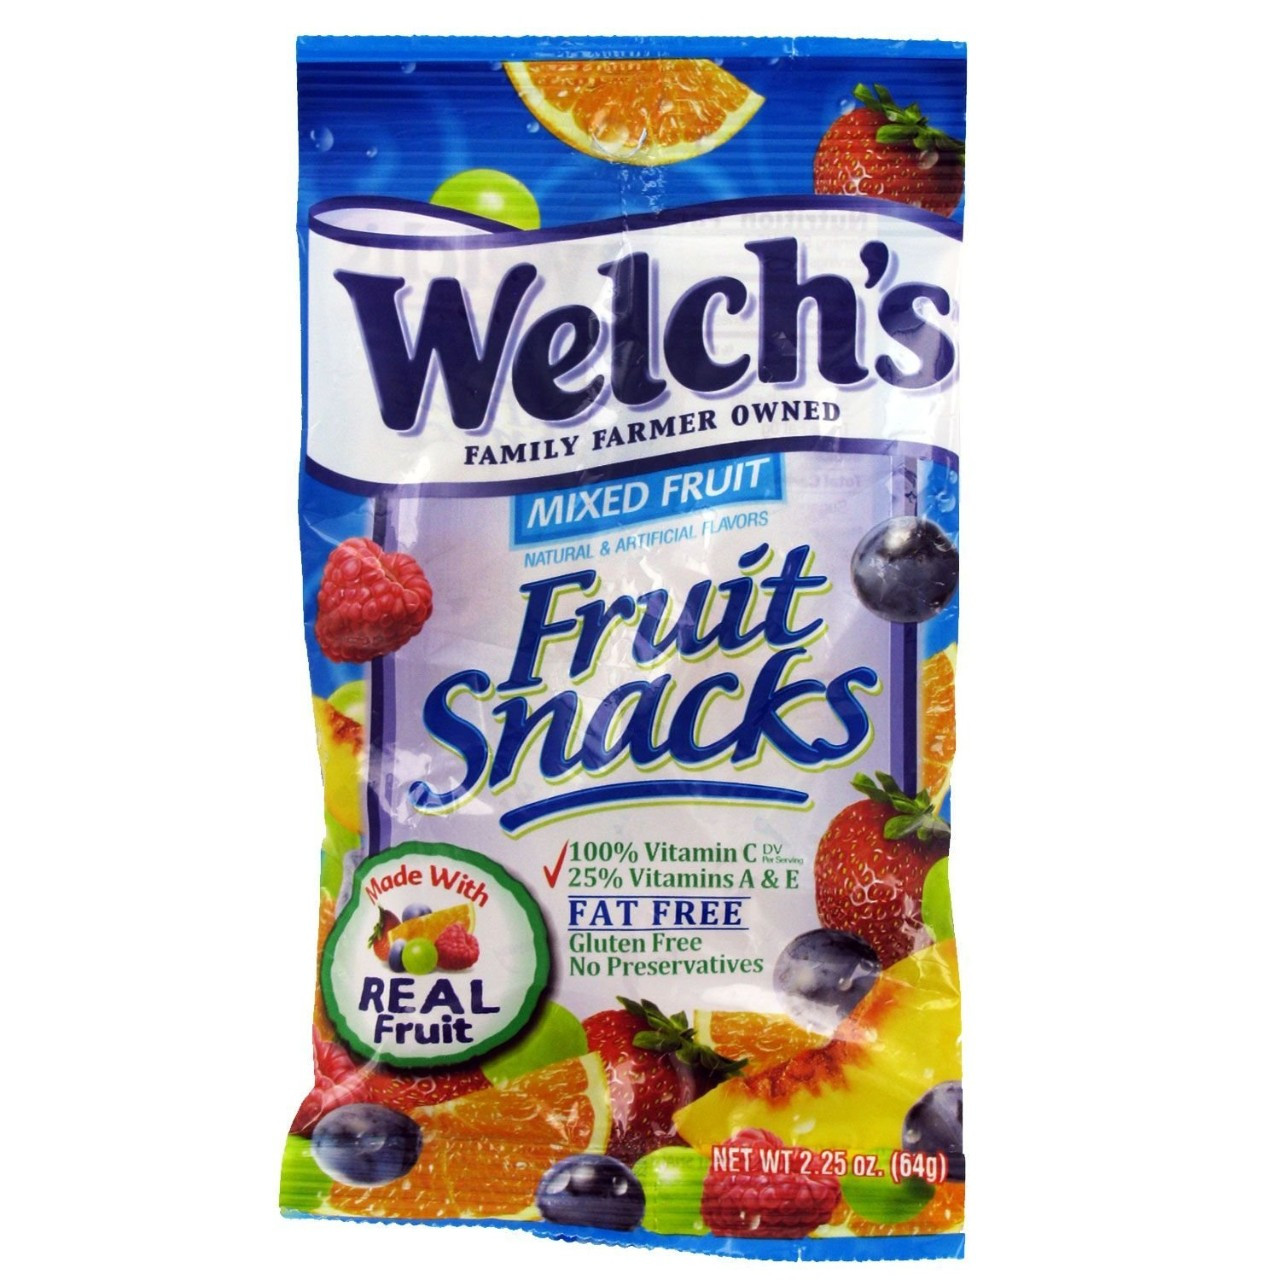 Are Welch'S Fruit Snacks Healthy
 Welch s Fruit Snacks lawsuit Fruit Snacks are not healthy